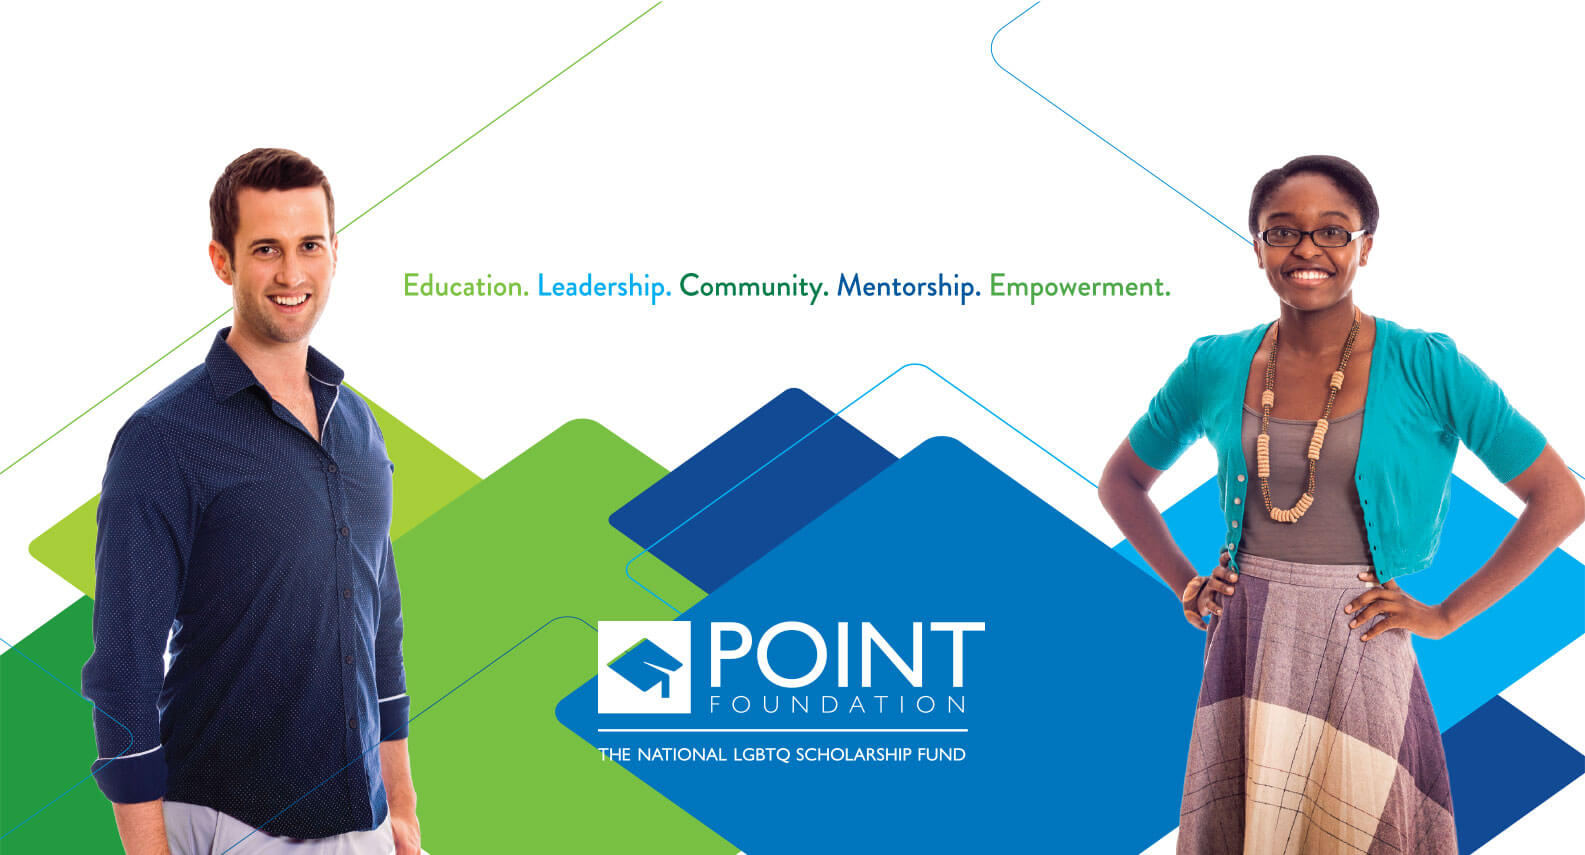 Point Foundation branding imagery